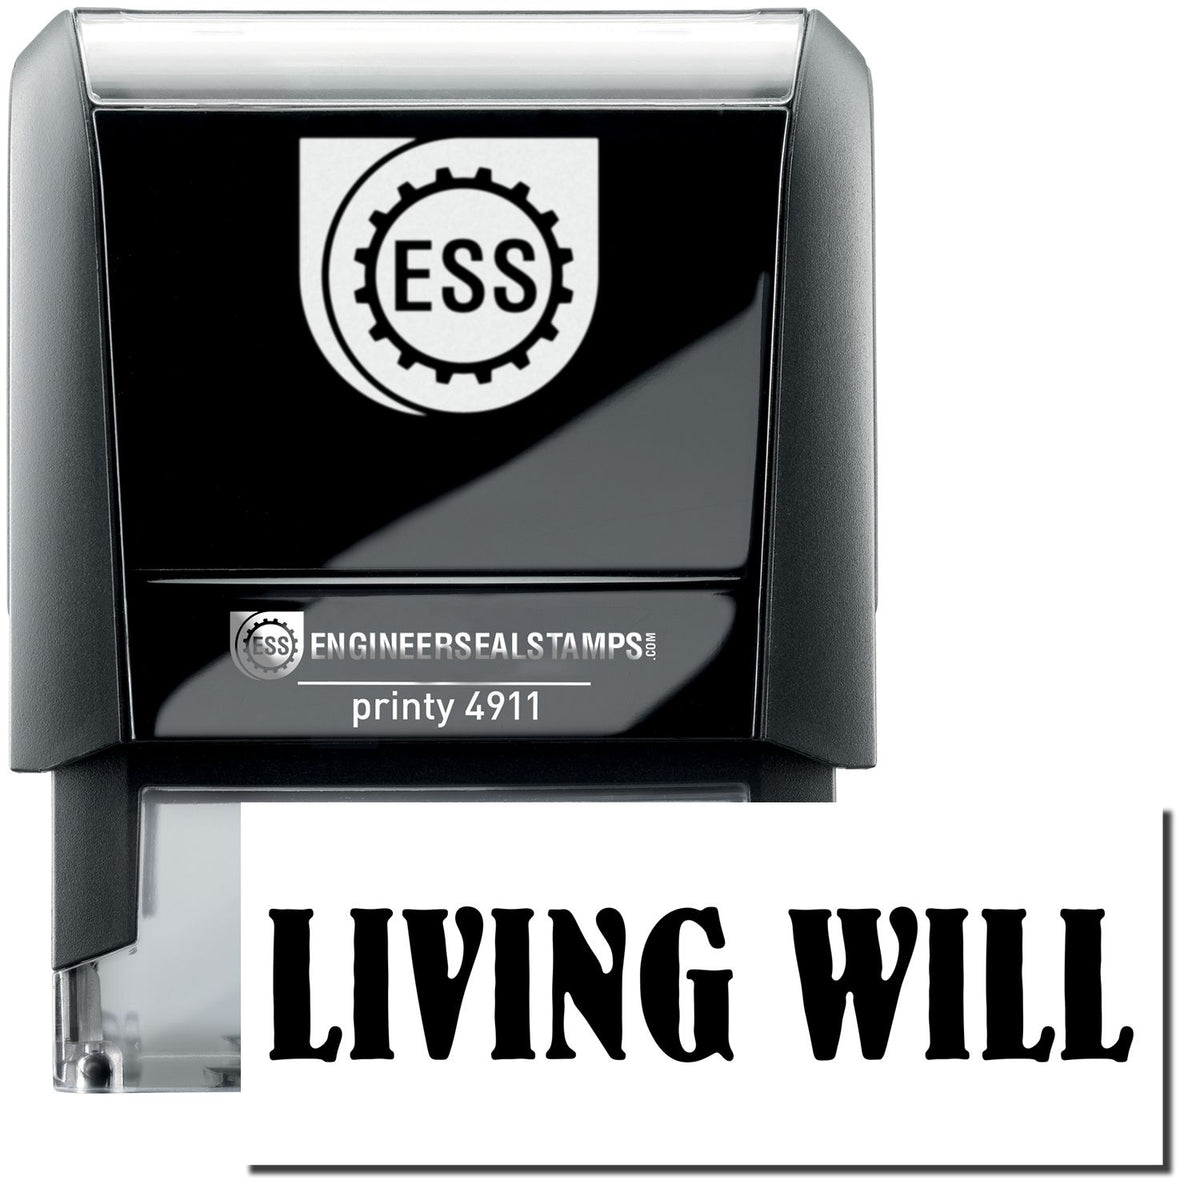 A self-inking stamp with a stamped image showing how the text &quot;LIVING WILL&quot; is displayed after stamping.